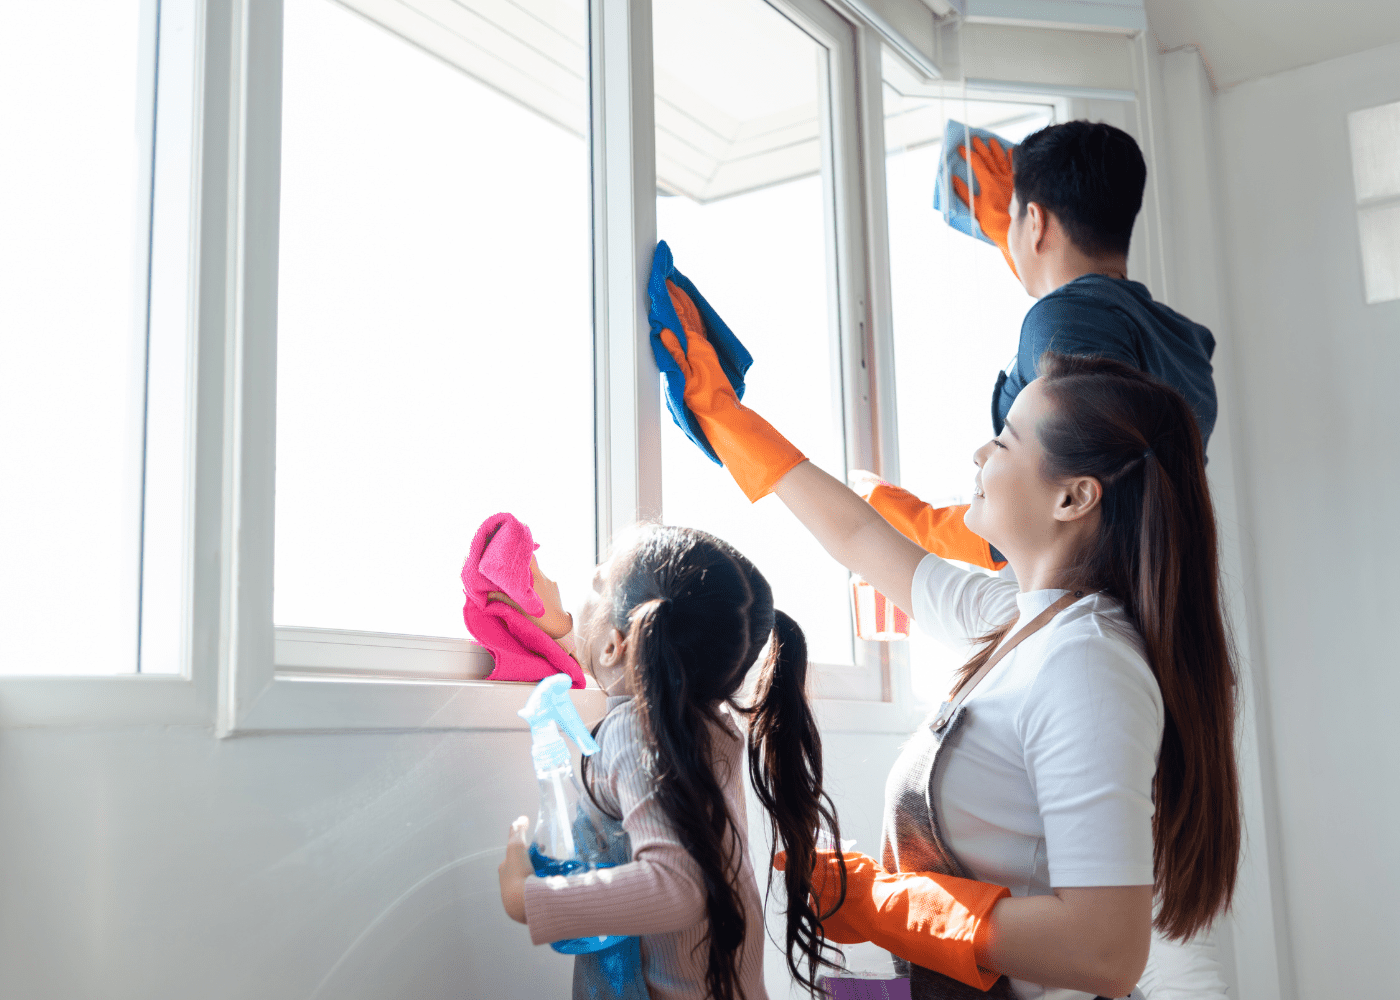 Family of three cleaning windows, including two adults and a child.